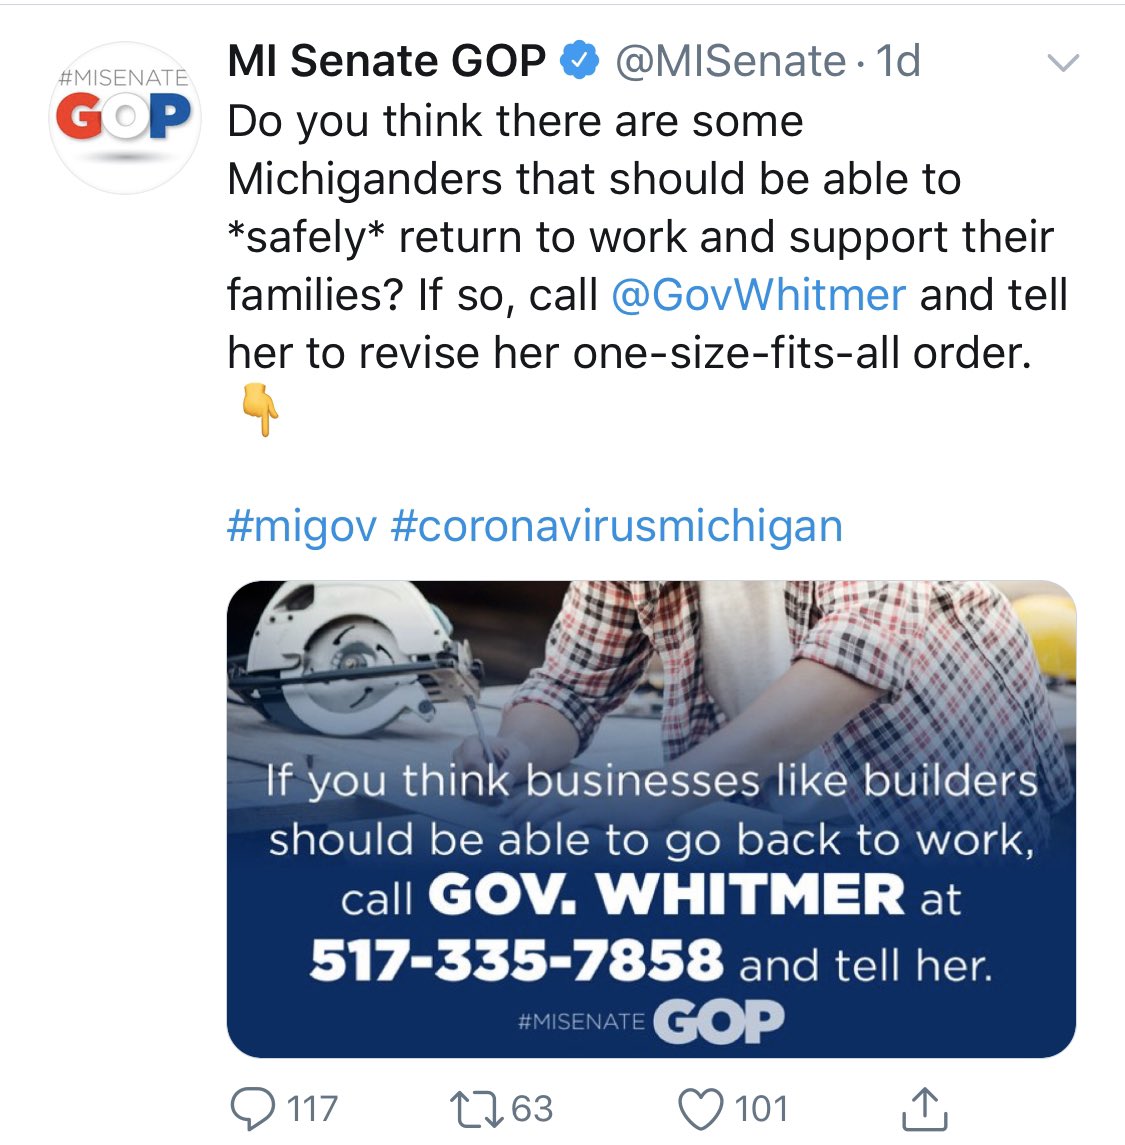 And the MI Senate GOP pressuring Gov Whitmer to open things up.